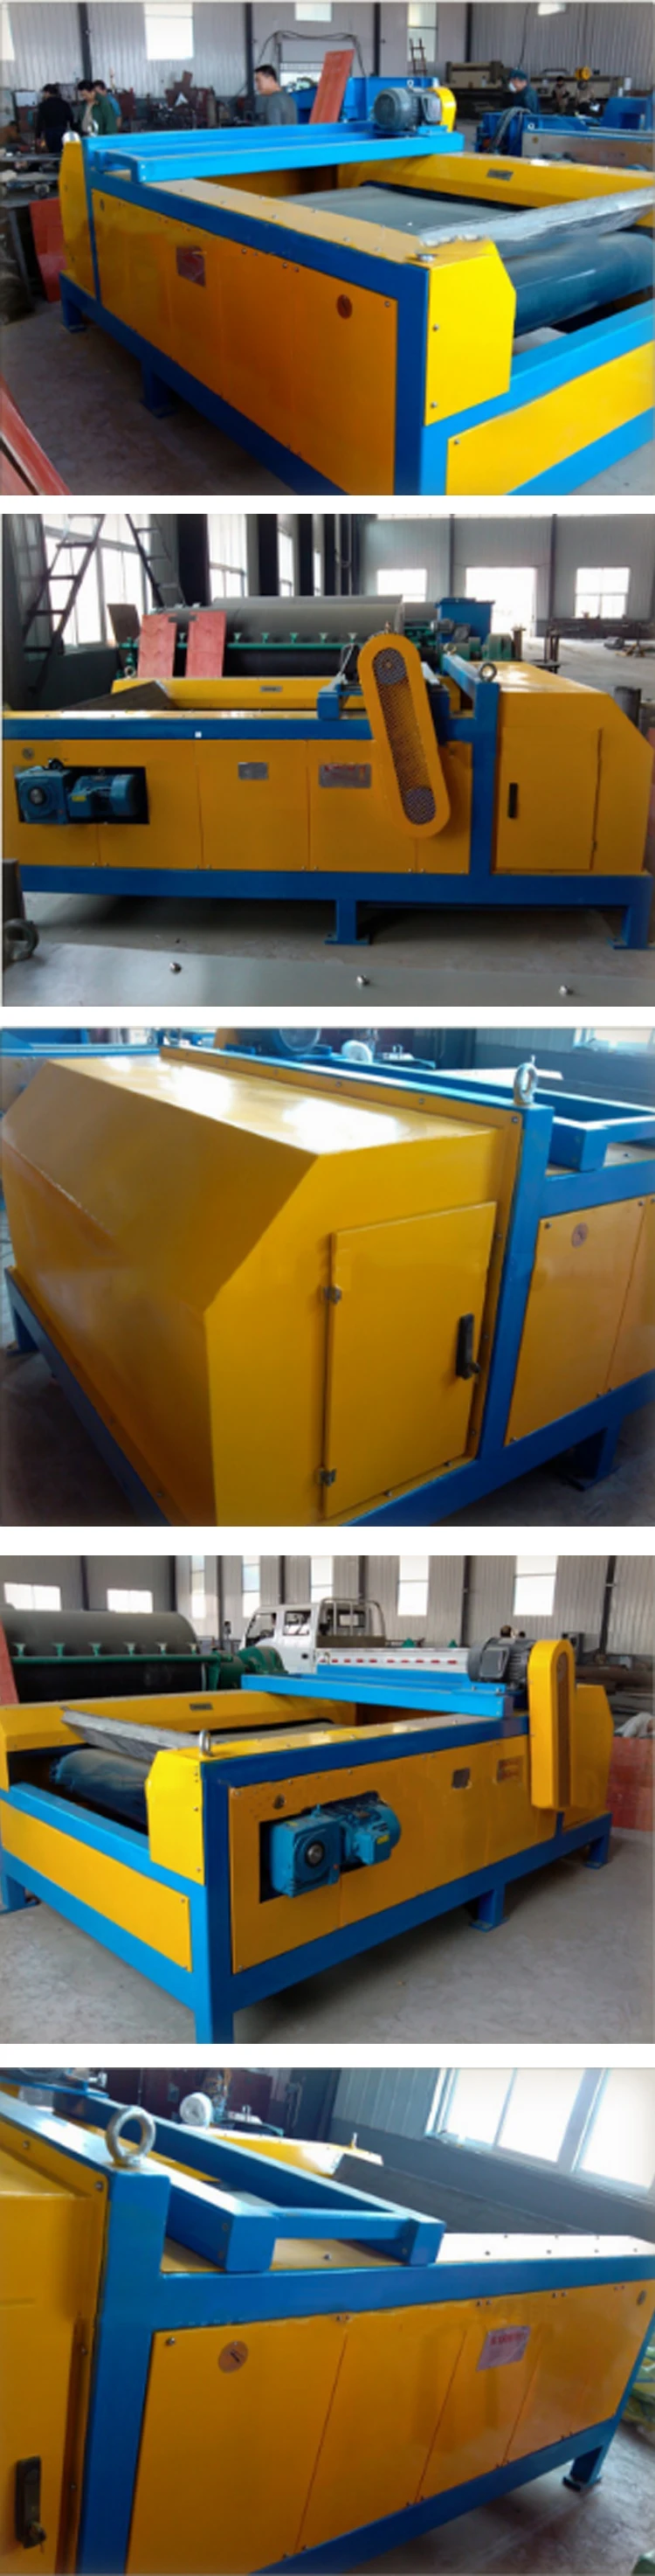 Densen customized concentric eddy current separator for aluminum and iron used in medical glasses scraps' recycling